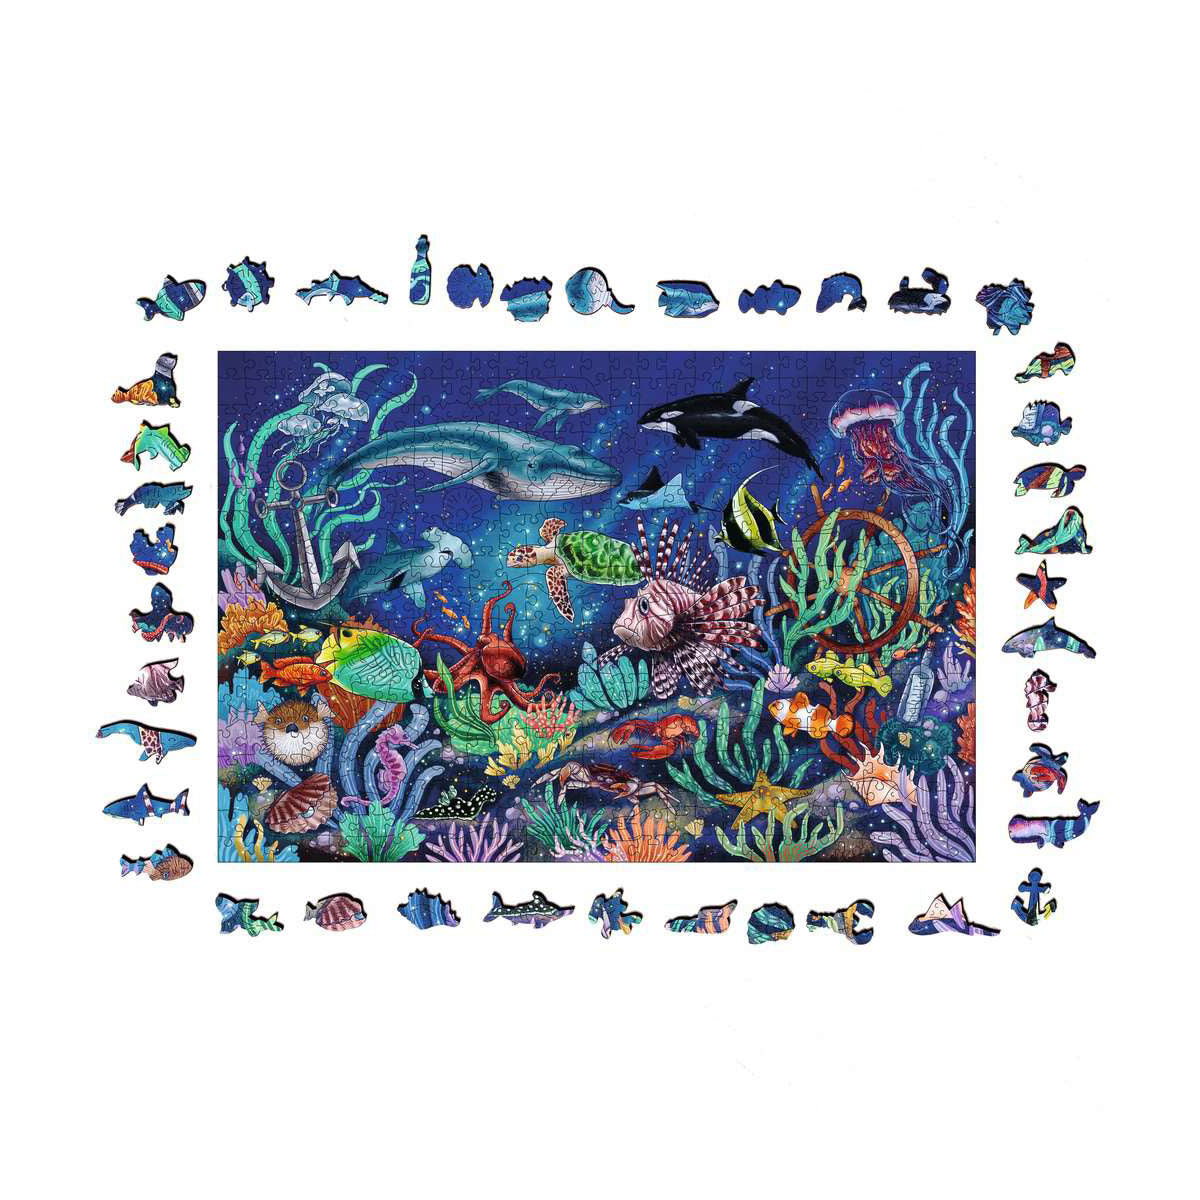 Ravensburger Wooden Jigsaw Puzzle Under the Sea - 500 Pieces